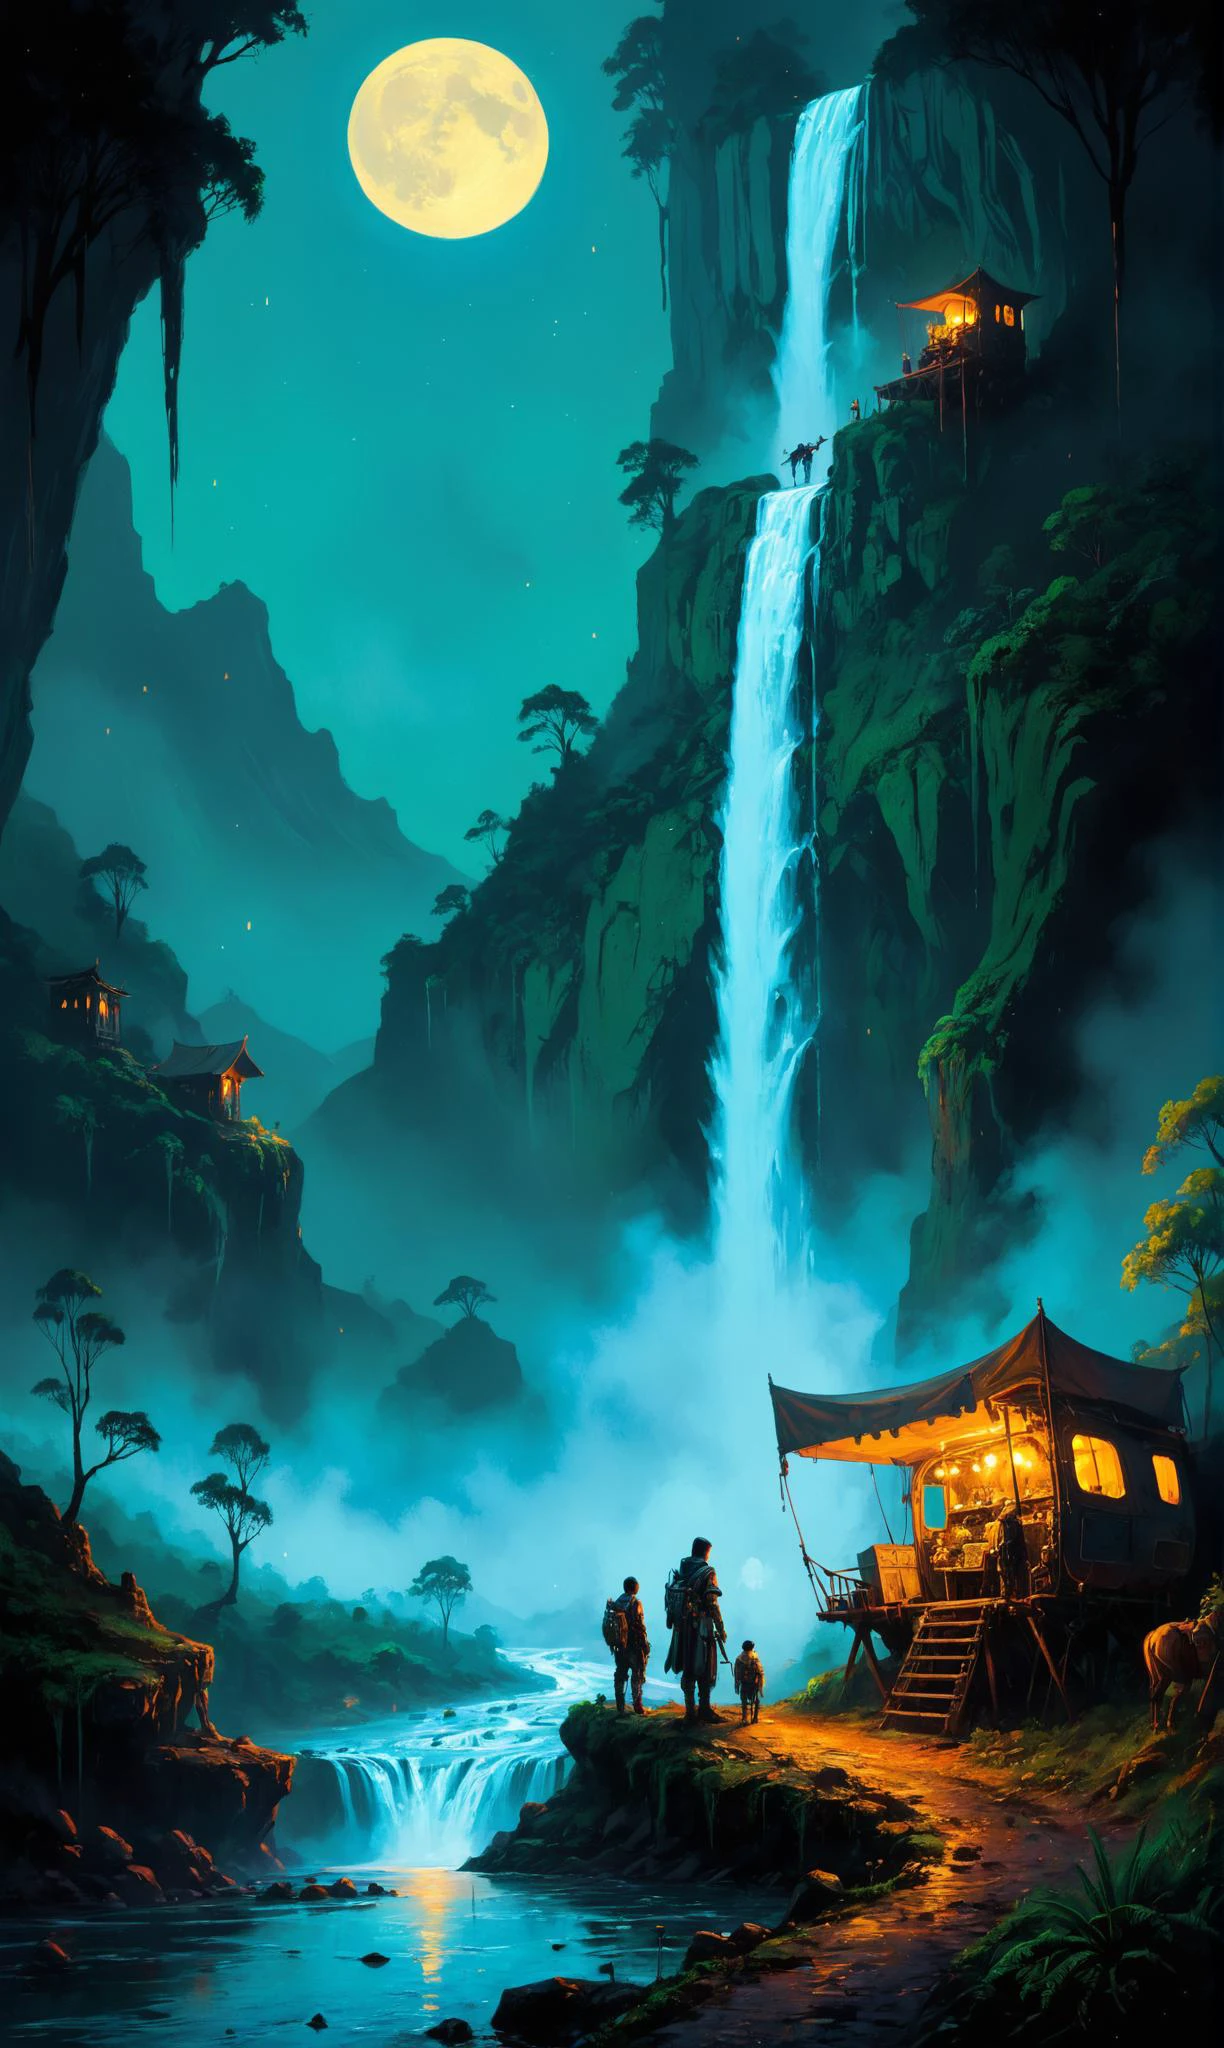 a Cyberpunk nomad trader with robotic caravan at a Mystic waterfall in moonlit valley, ultra-fine digital painting, bl4ckl1ghtxl victorianstyle